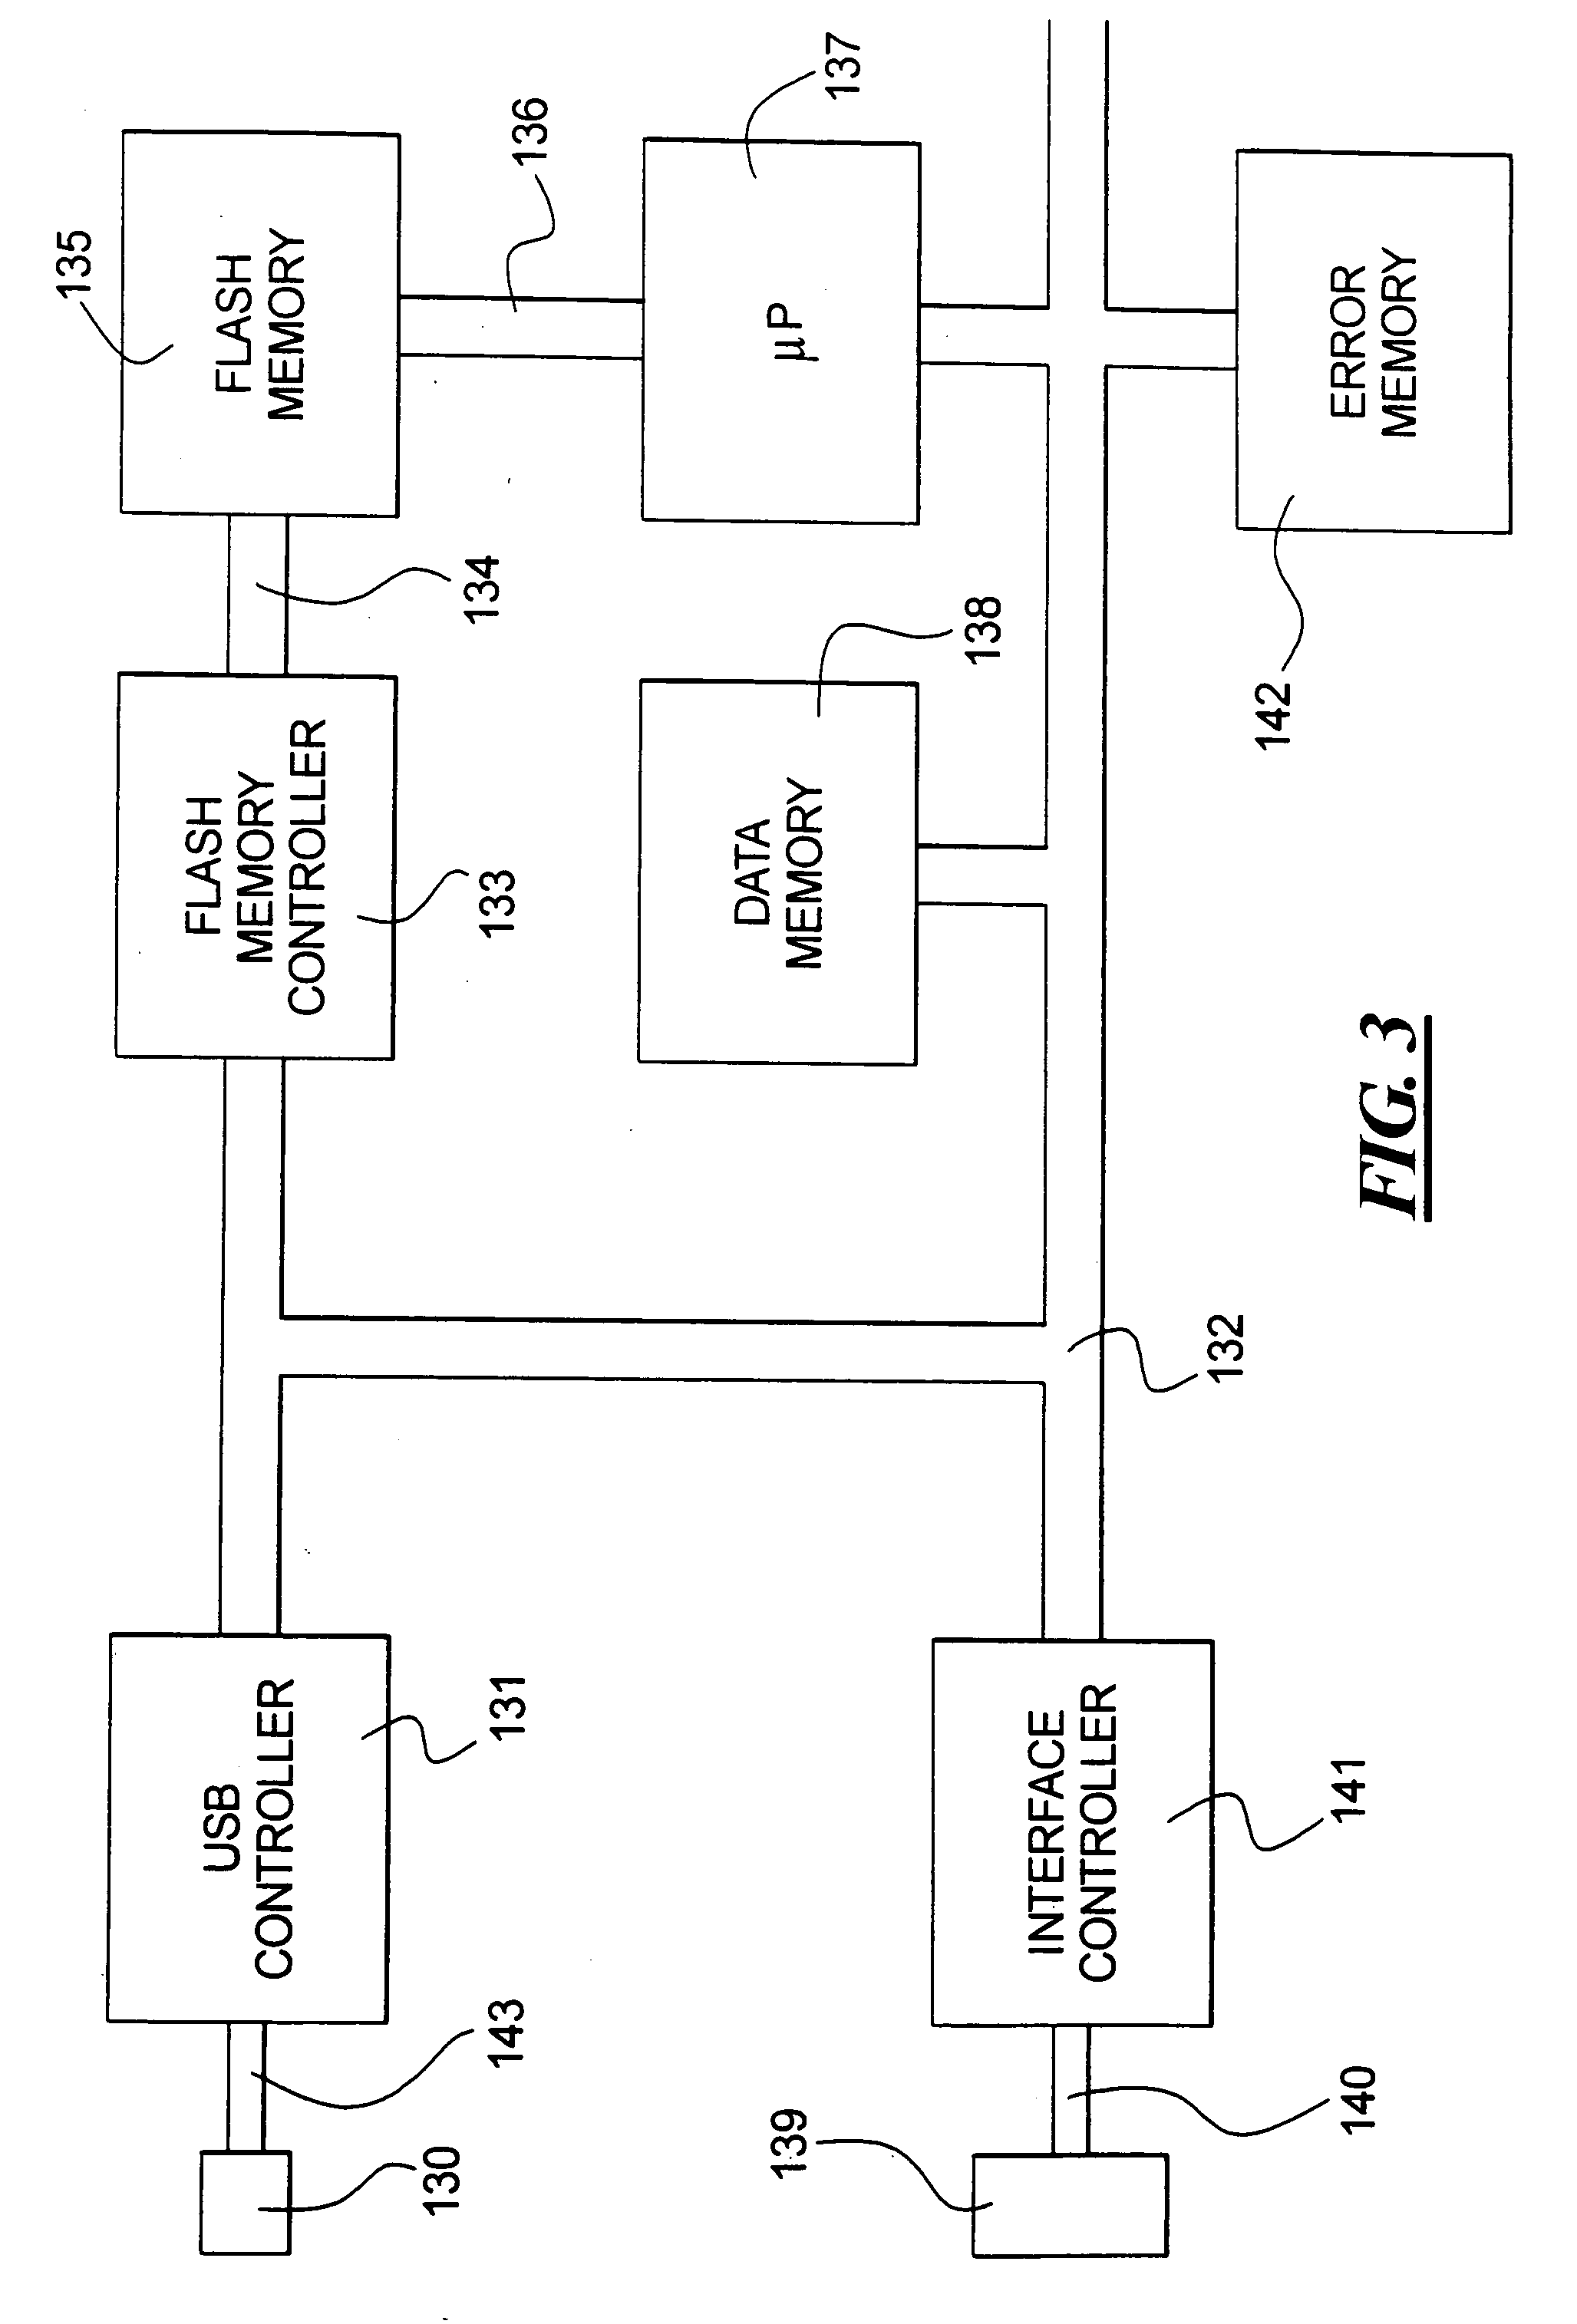 Method and system for communication between a tape drive and an external device